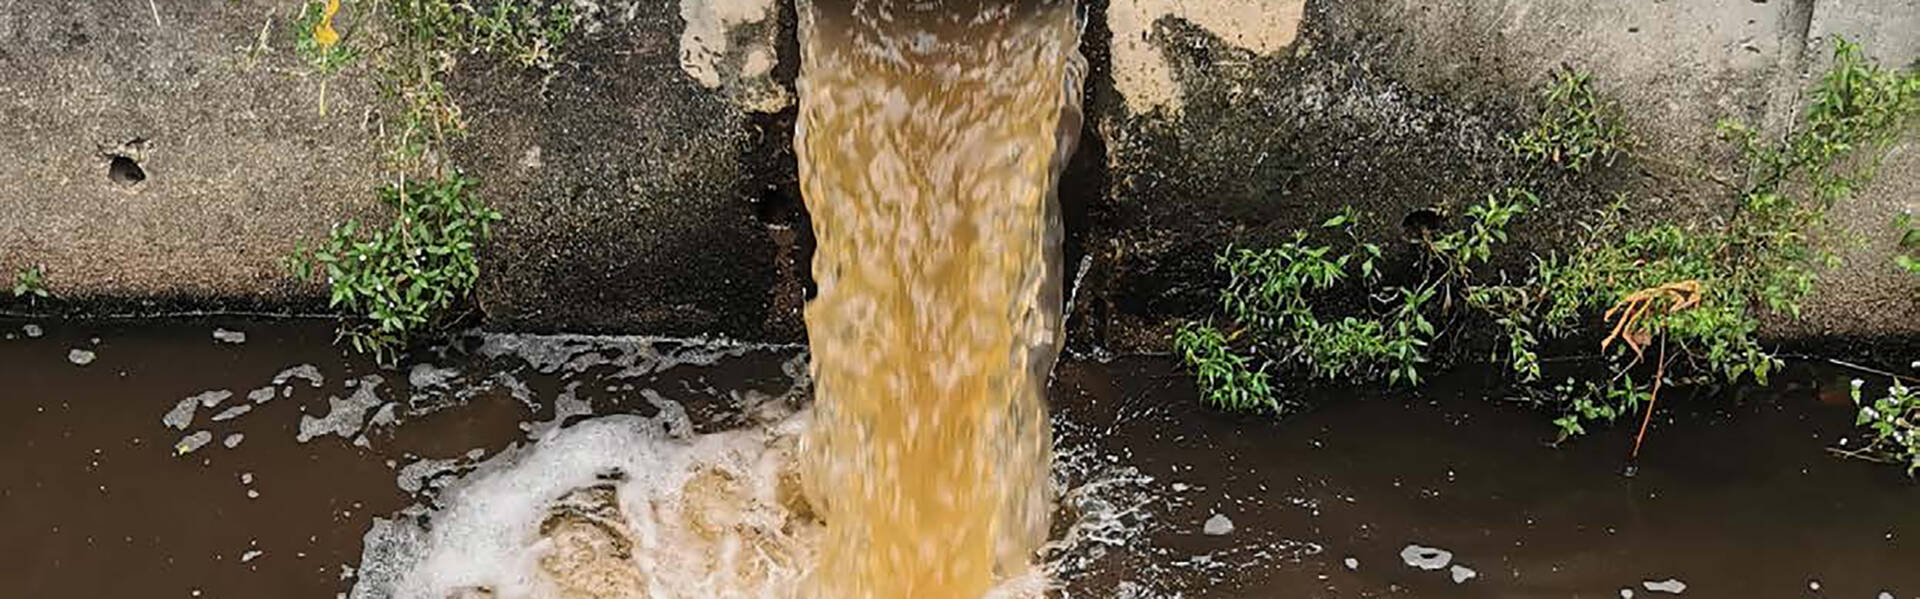 Ofwat: Wastewater plans must reflect CSO targets